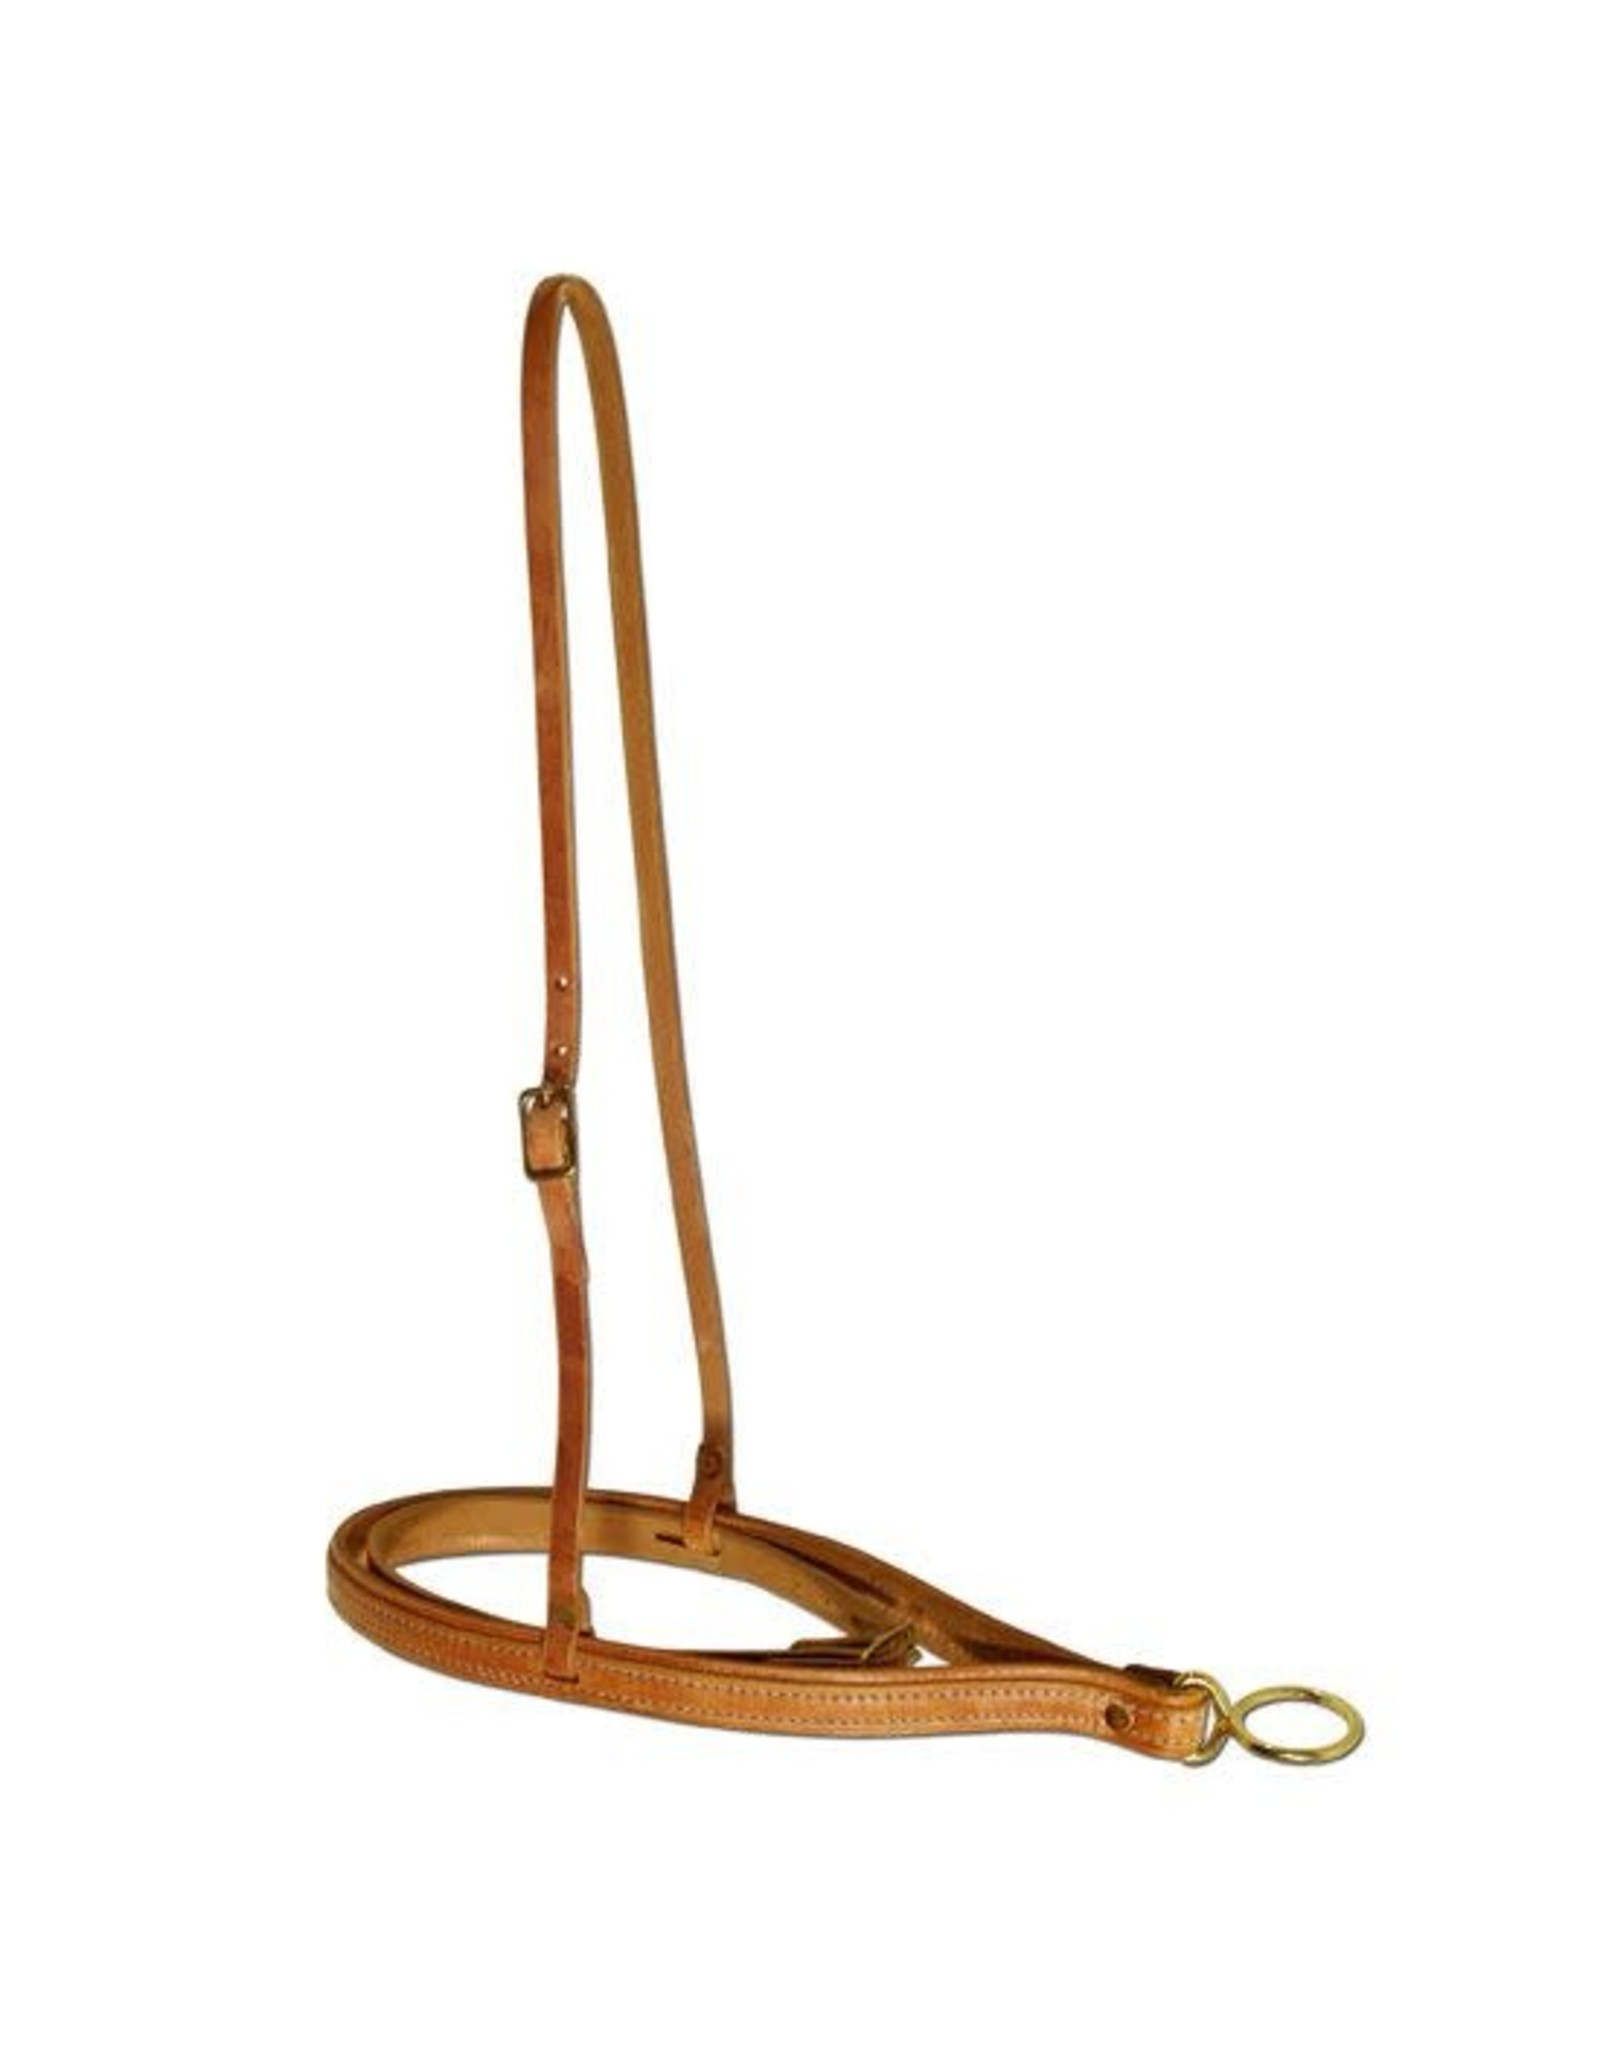 Berlin Custom Leather Cavesson with Noseband Harness Leather